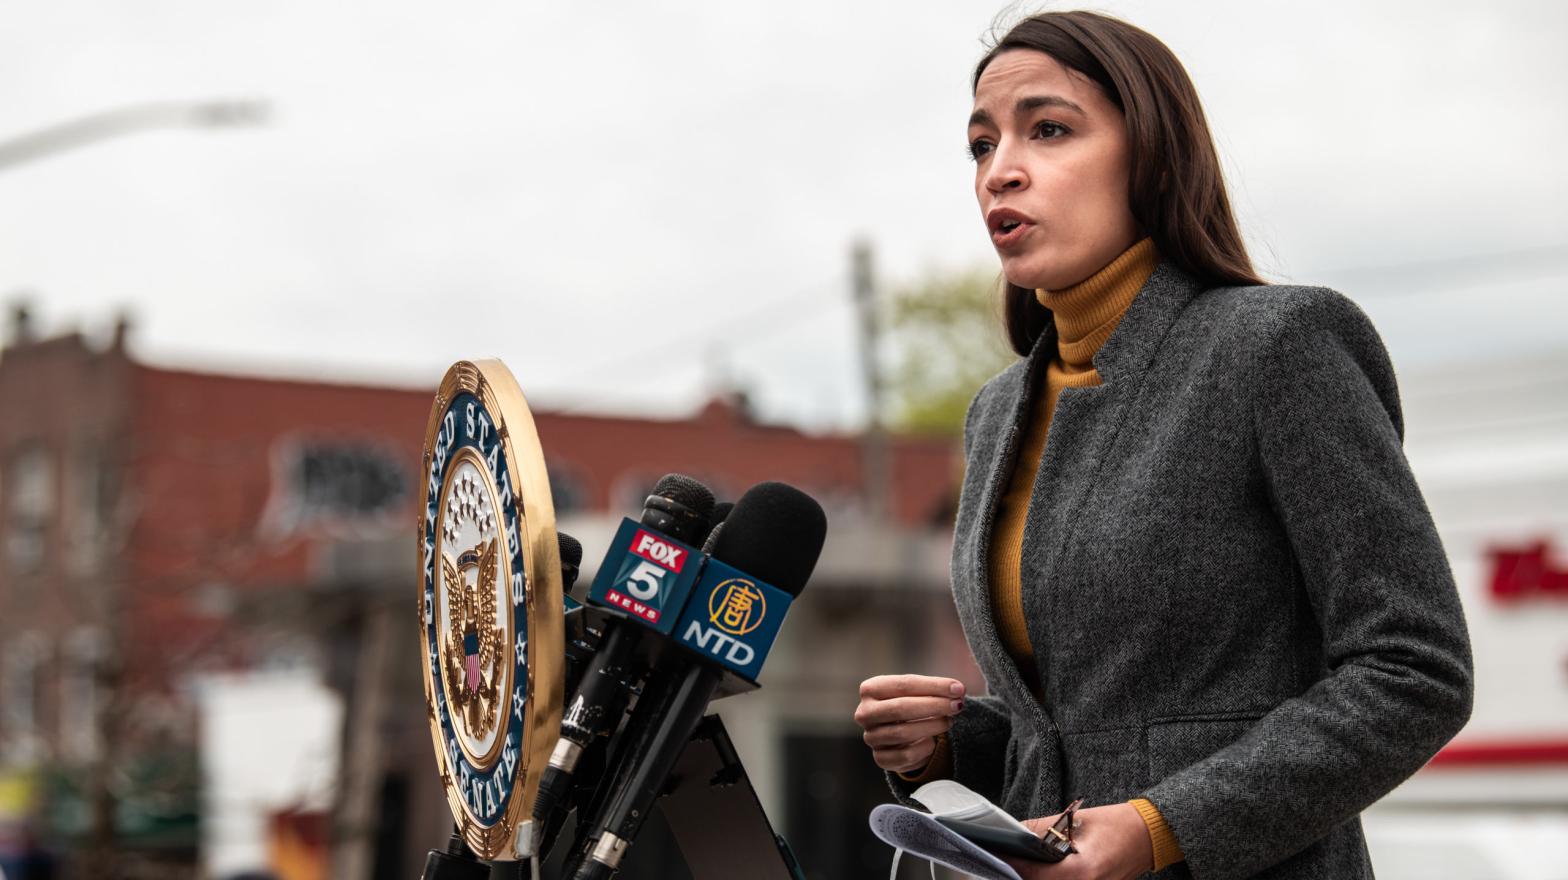 Representative Alexandria Ocasio Cortez speaks at a press conference at Corona Plaza in Queens on April 14, 2020 in New York City.  (Photo:  Scott Heins, Getty Images)